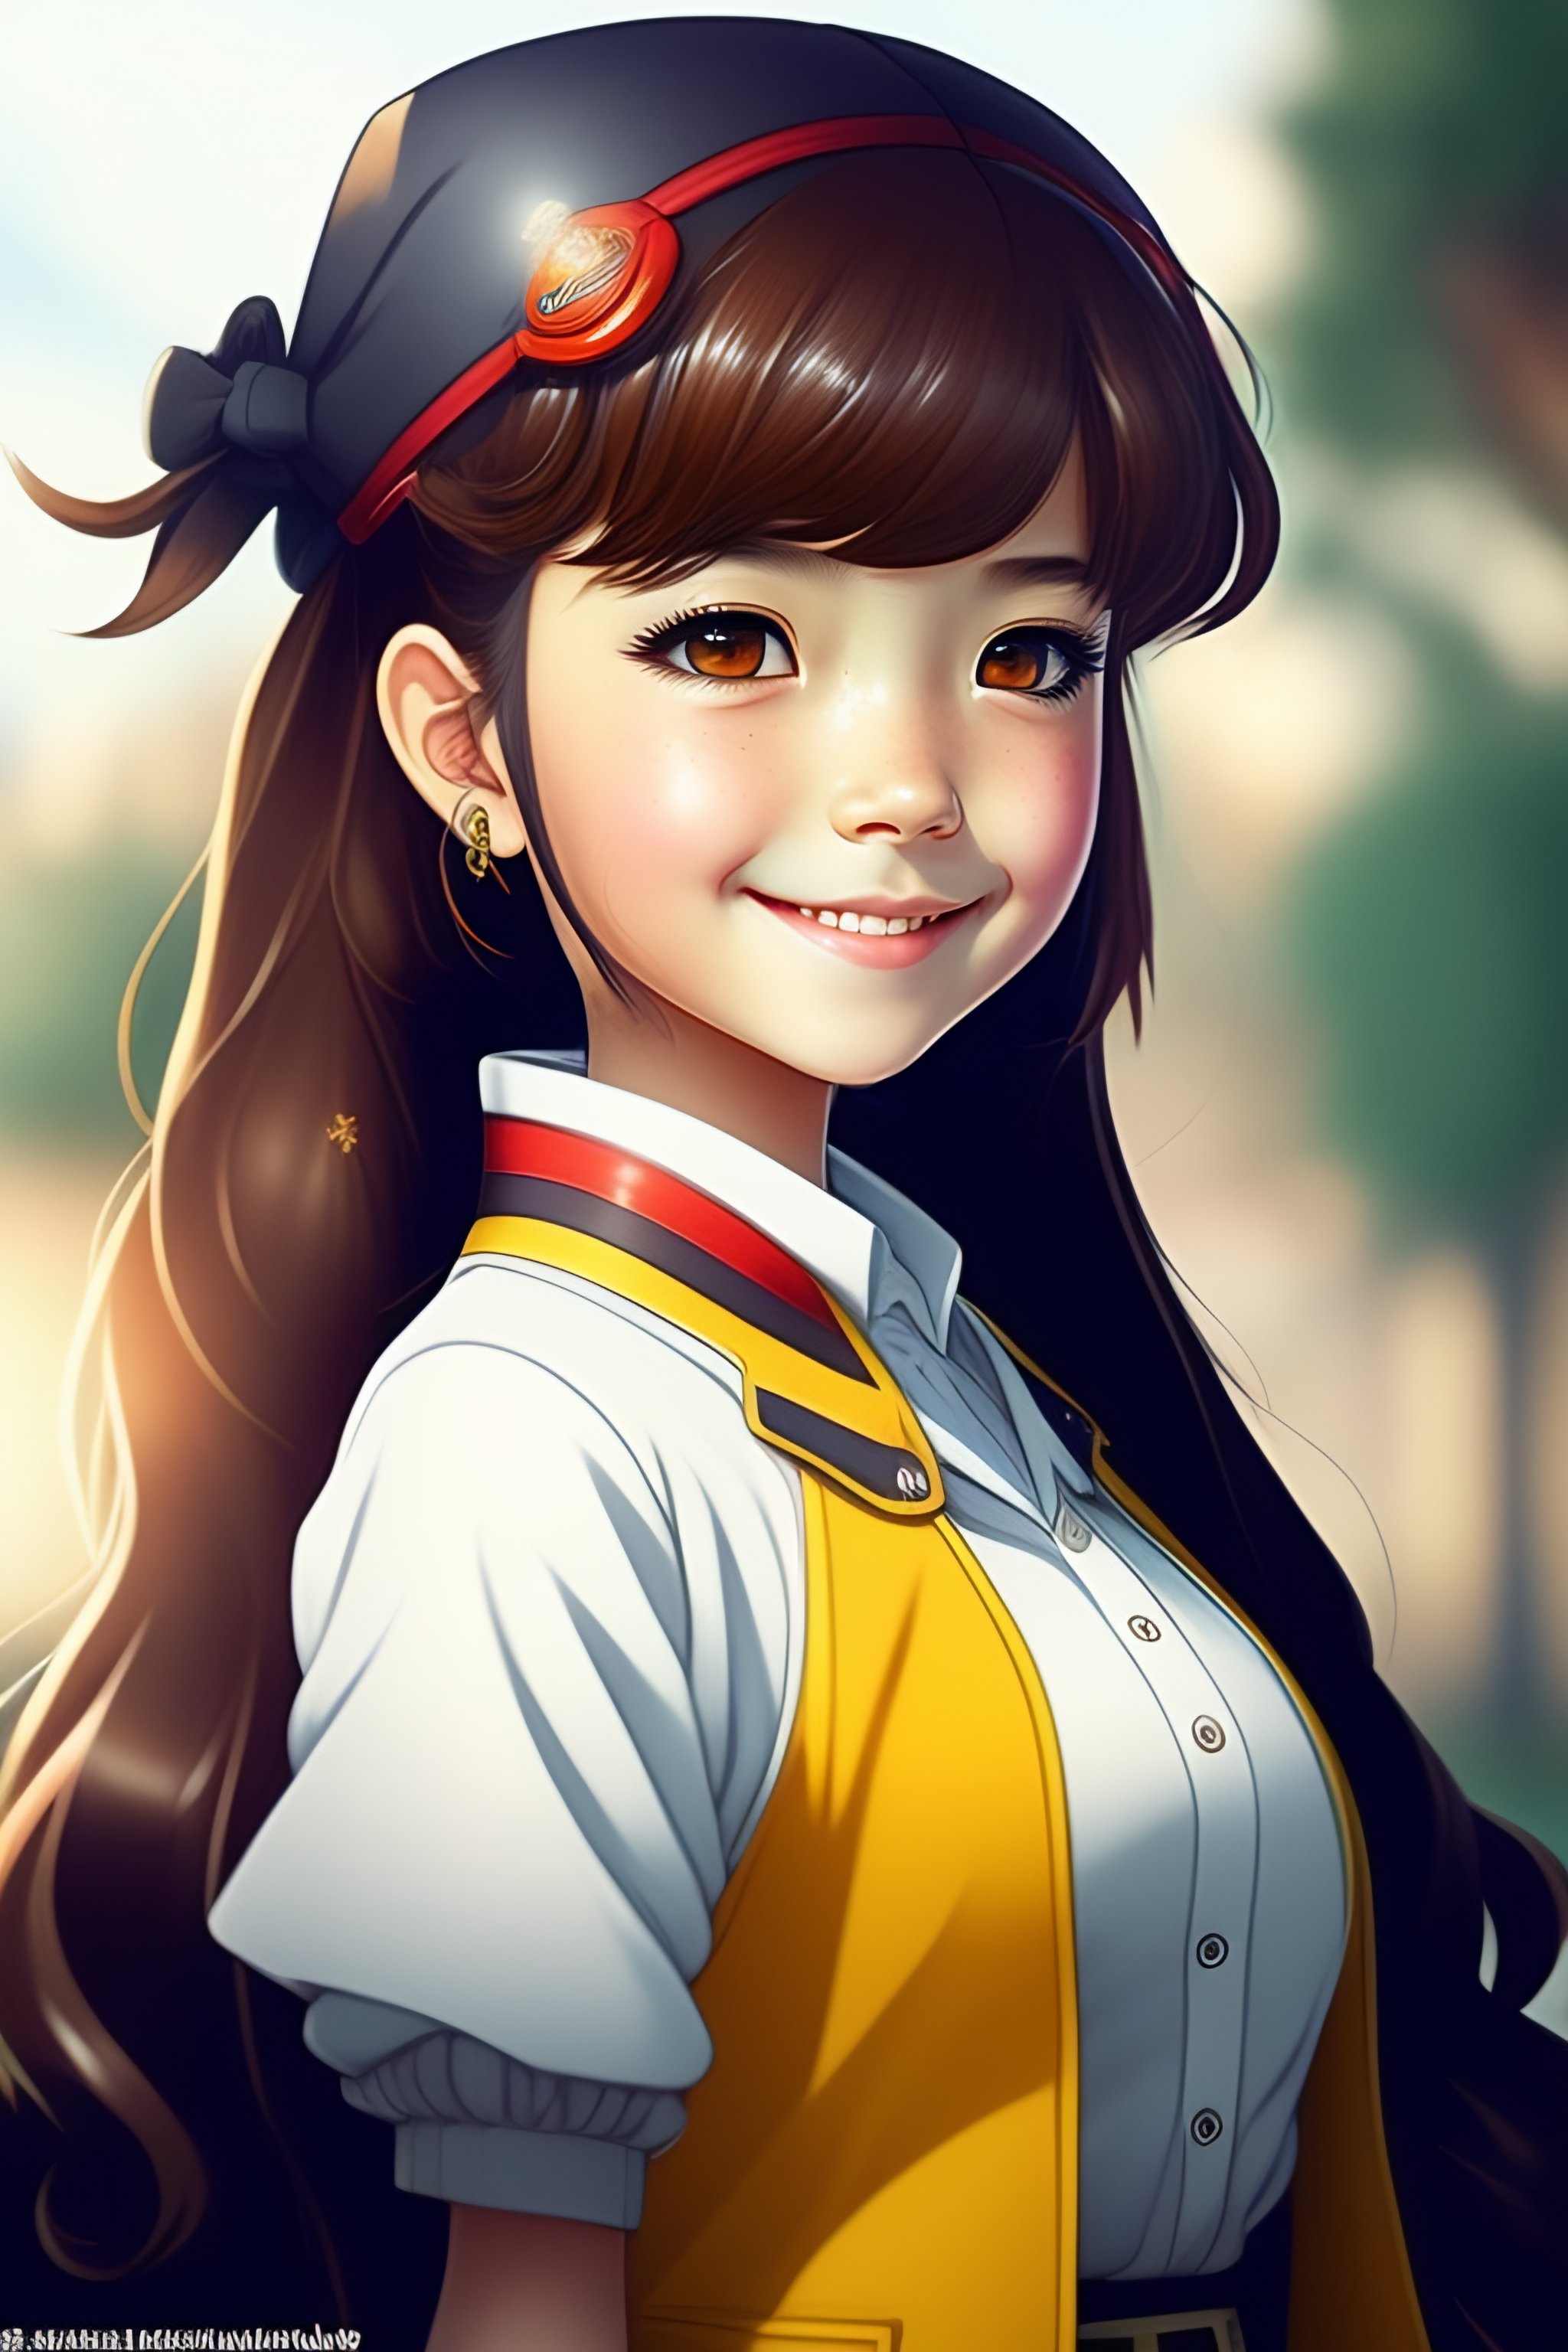 cartoon girl smiling with brown hair